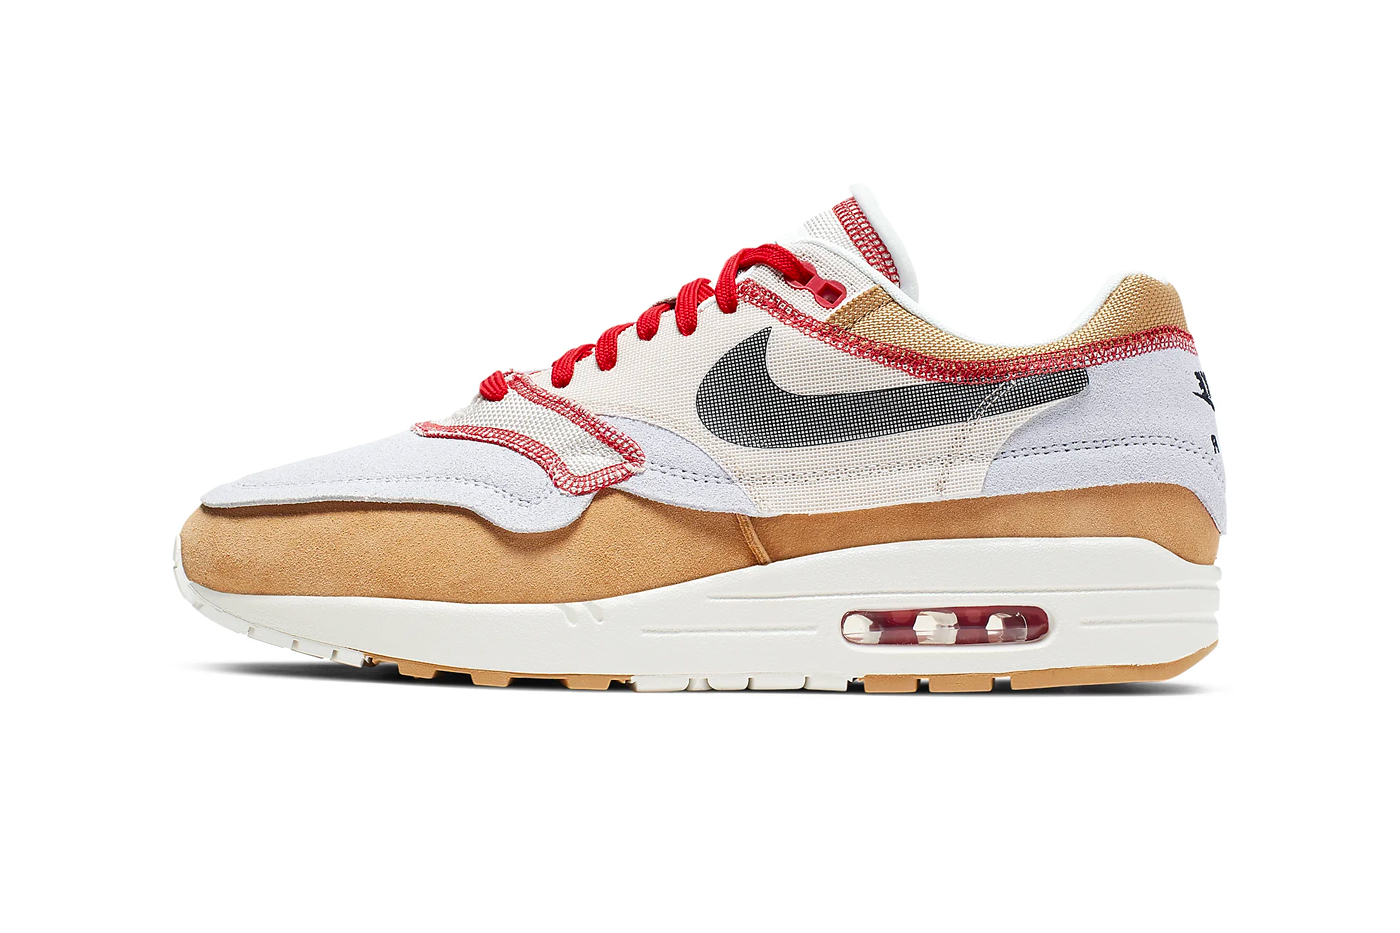 Nike Air Max 1 Premium SE Inside Out Release Info 858876-713